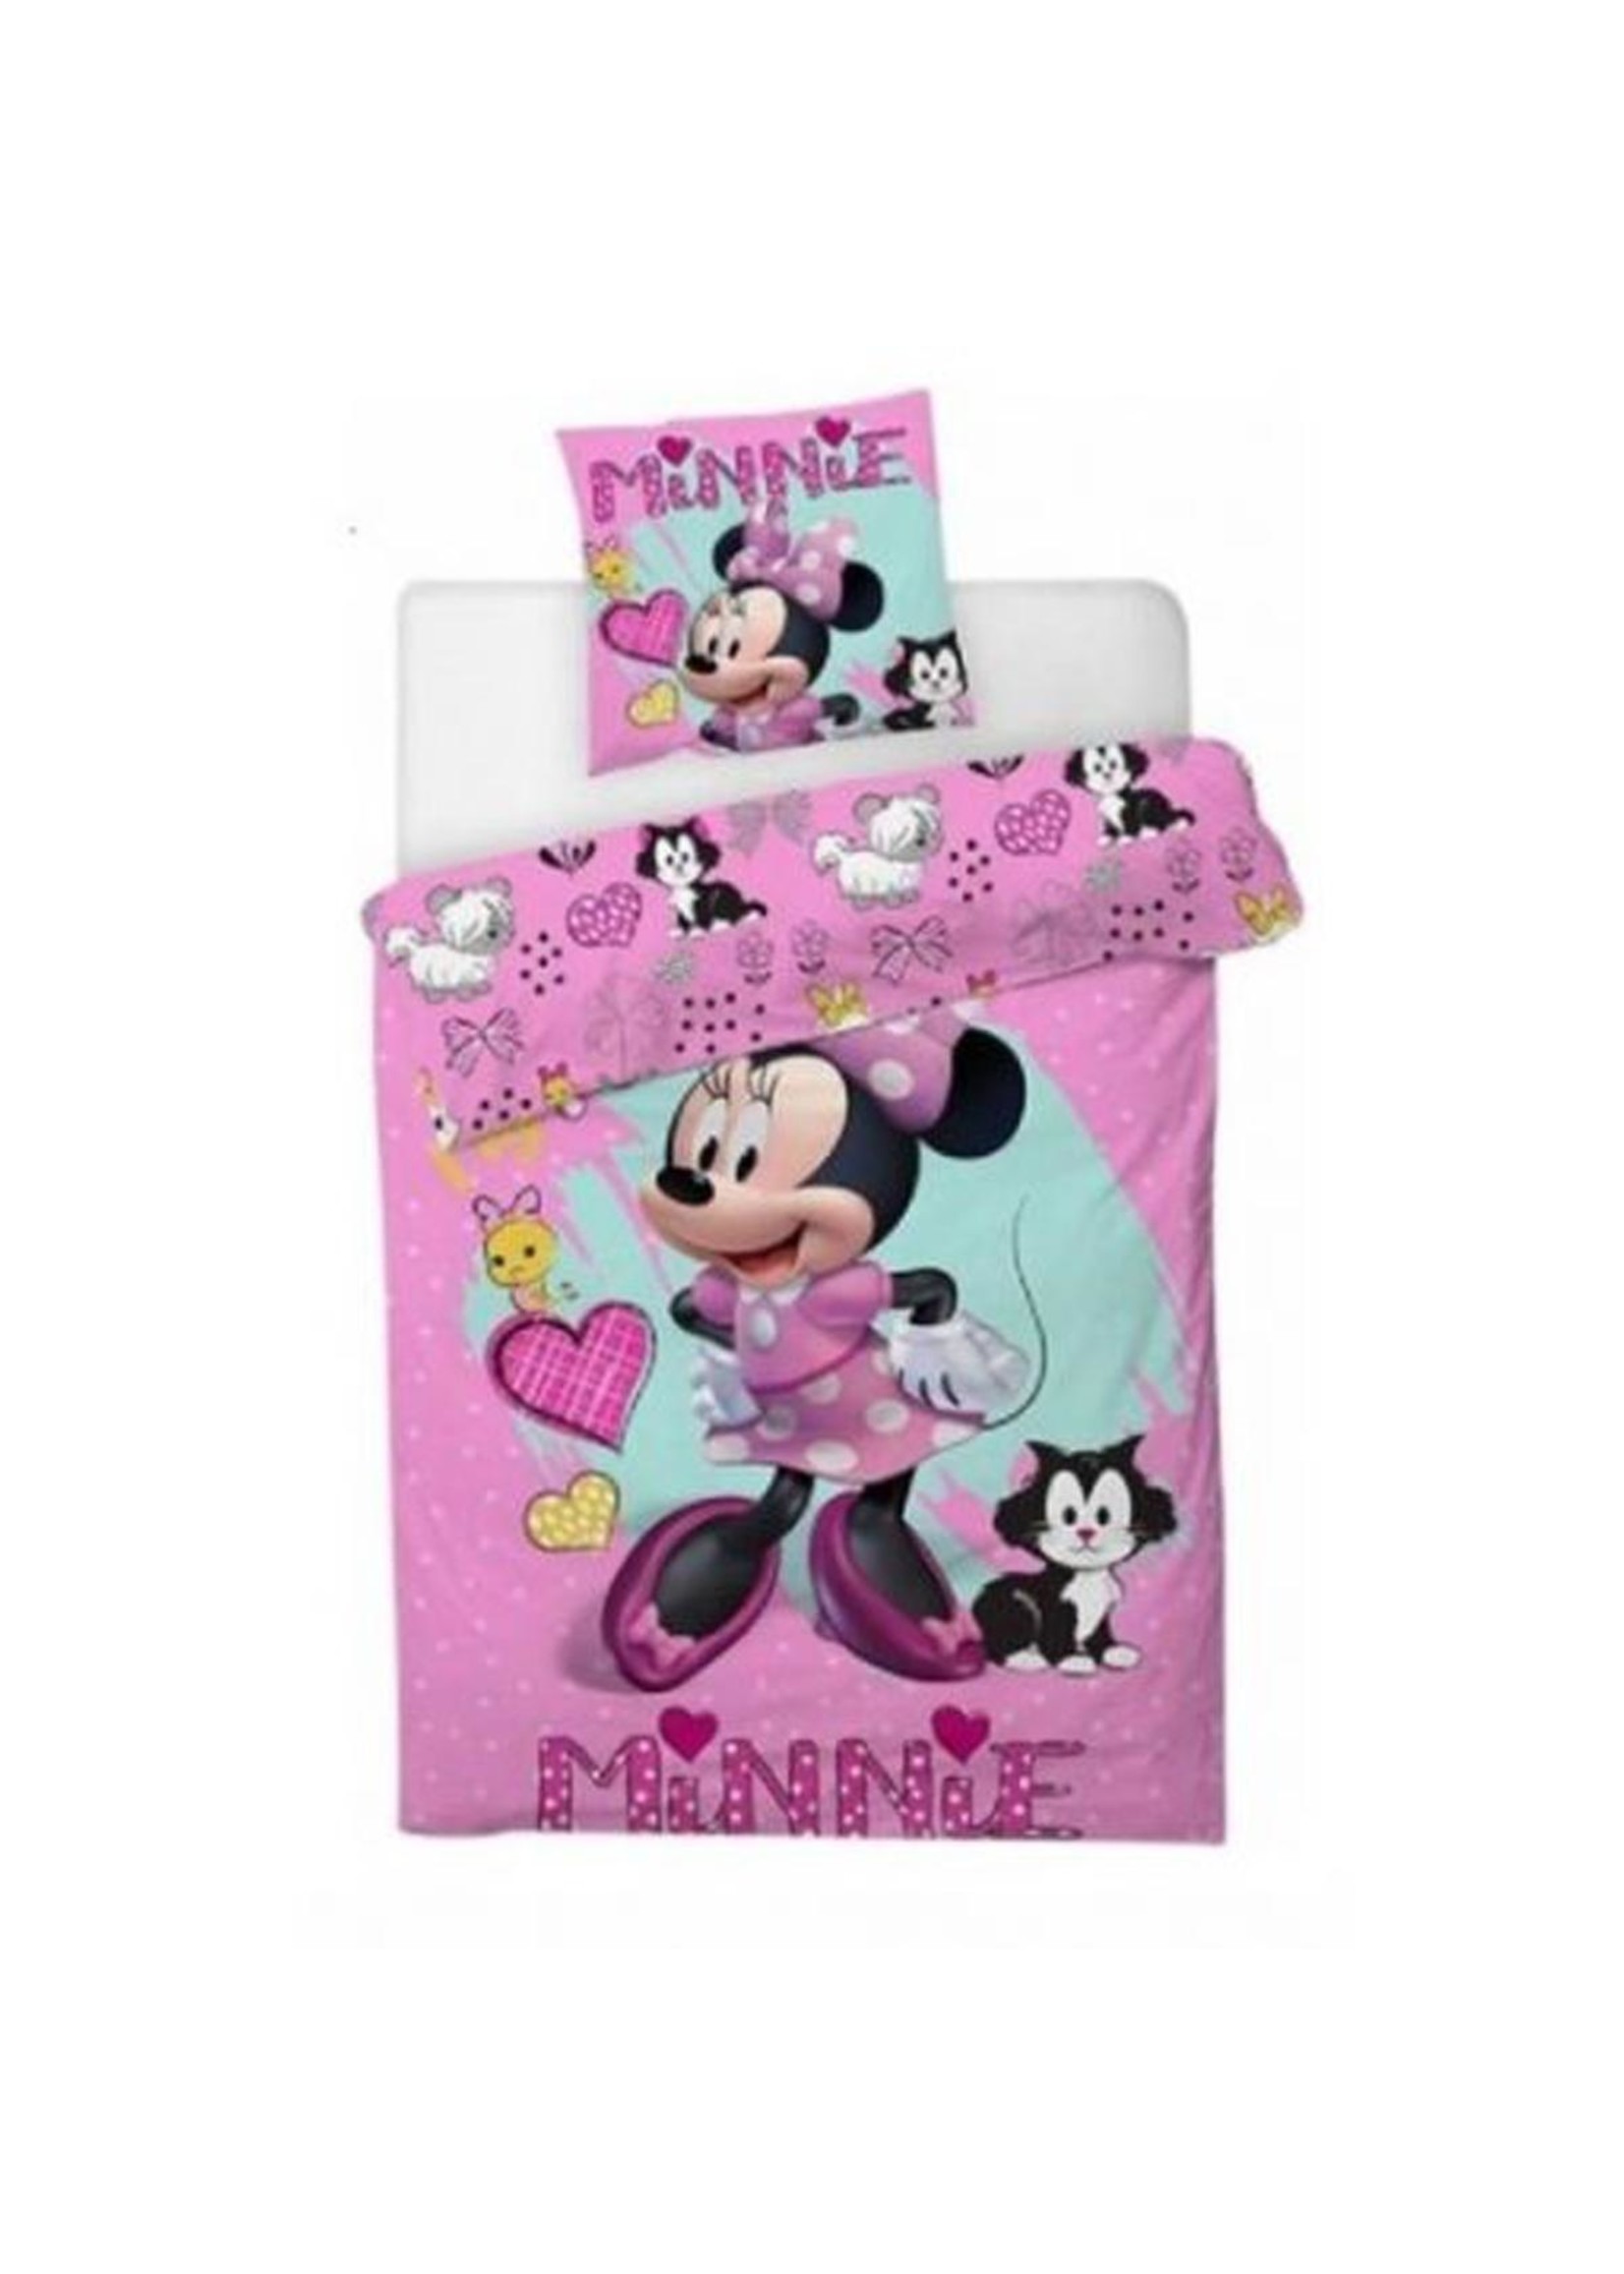 Disney Minnie Mouse duvet cover from Disney